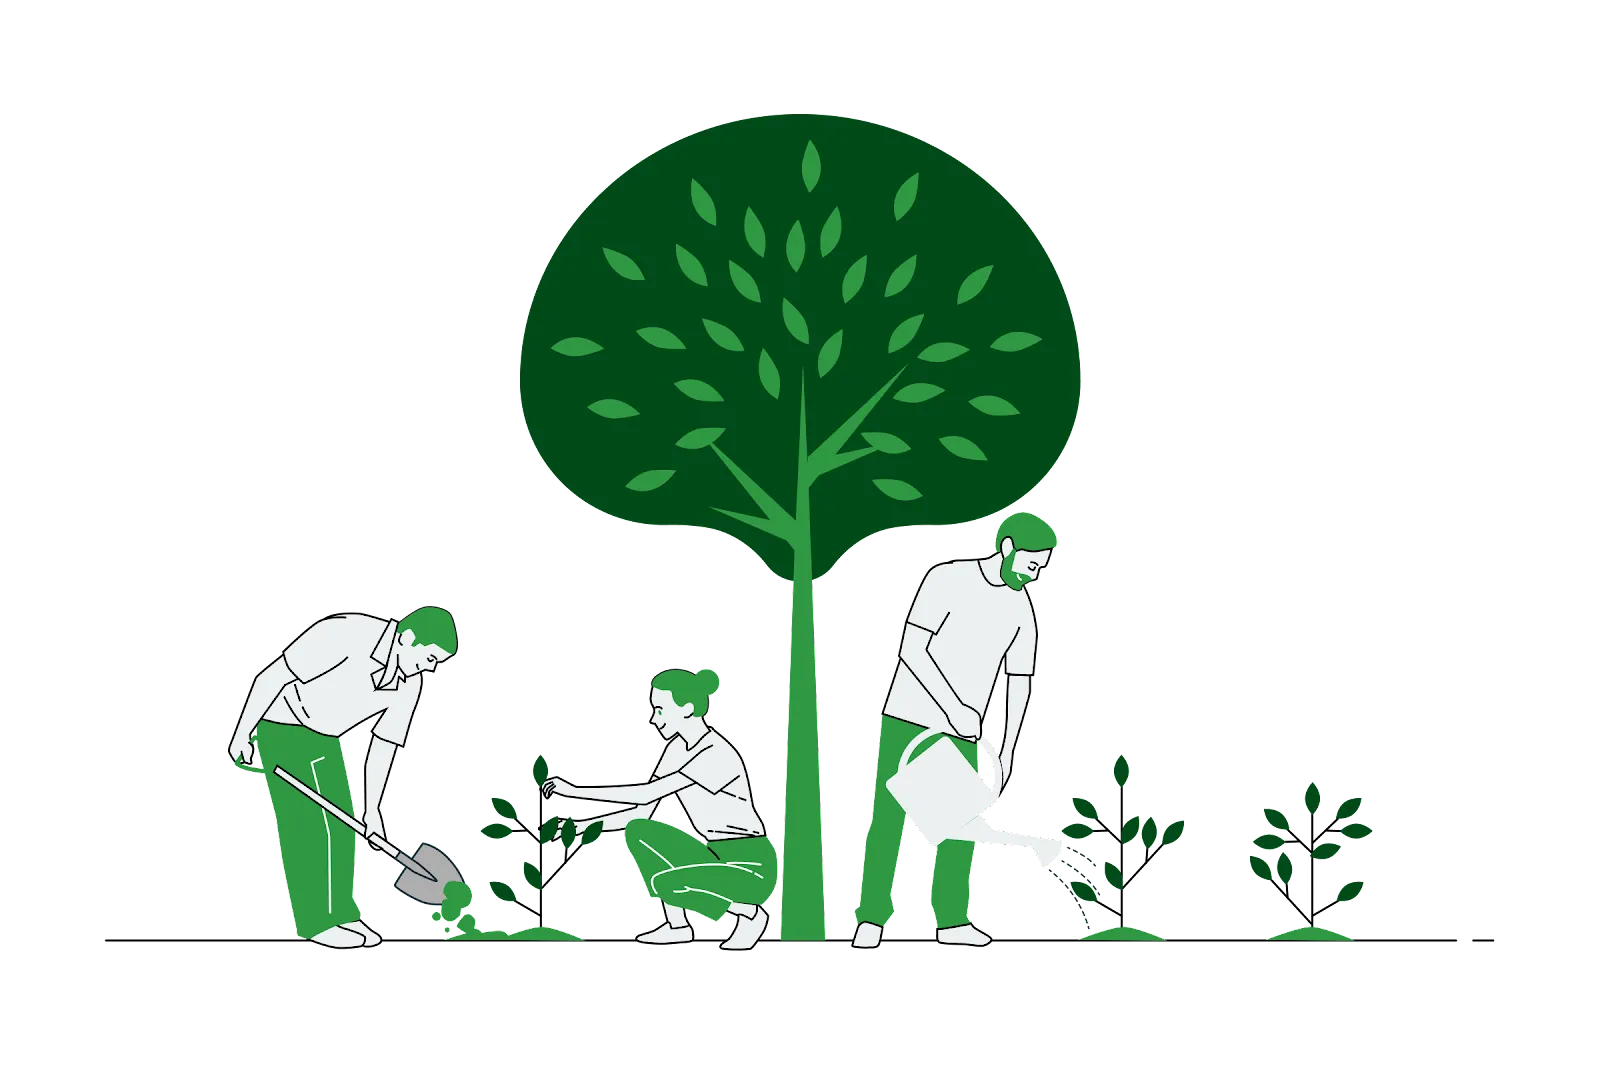  An image titled "Preventing soil erosion through reforestation" showing three people planting trees on soil. The image depicts individuals engaged in reforestation efforts by growing plants on the ground. In the background, a tall tree can be seen, symbolizing the positive impact of reforestation in preventing soil erosion and promoting environmental conservation.